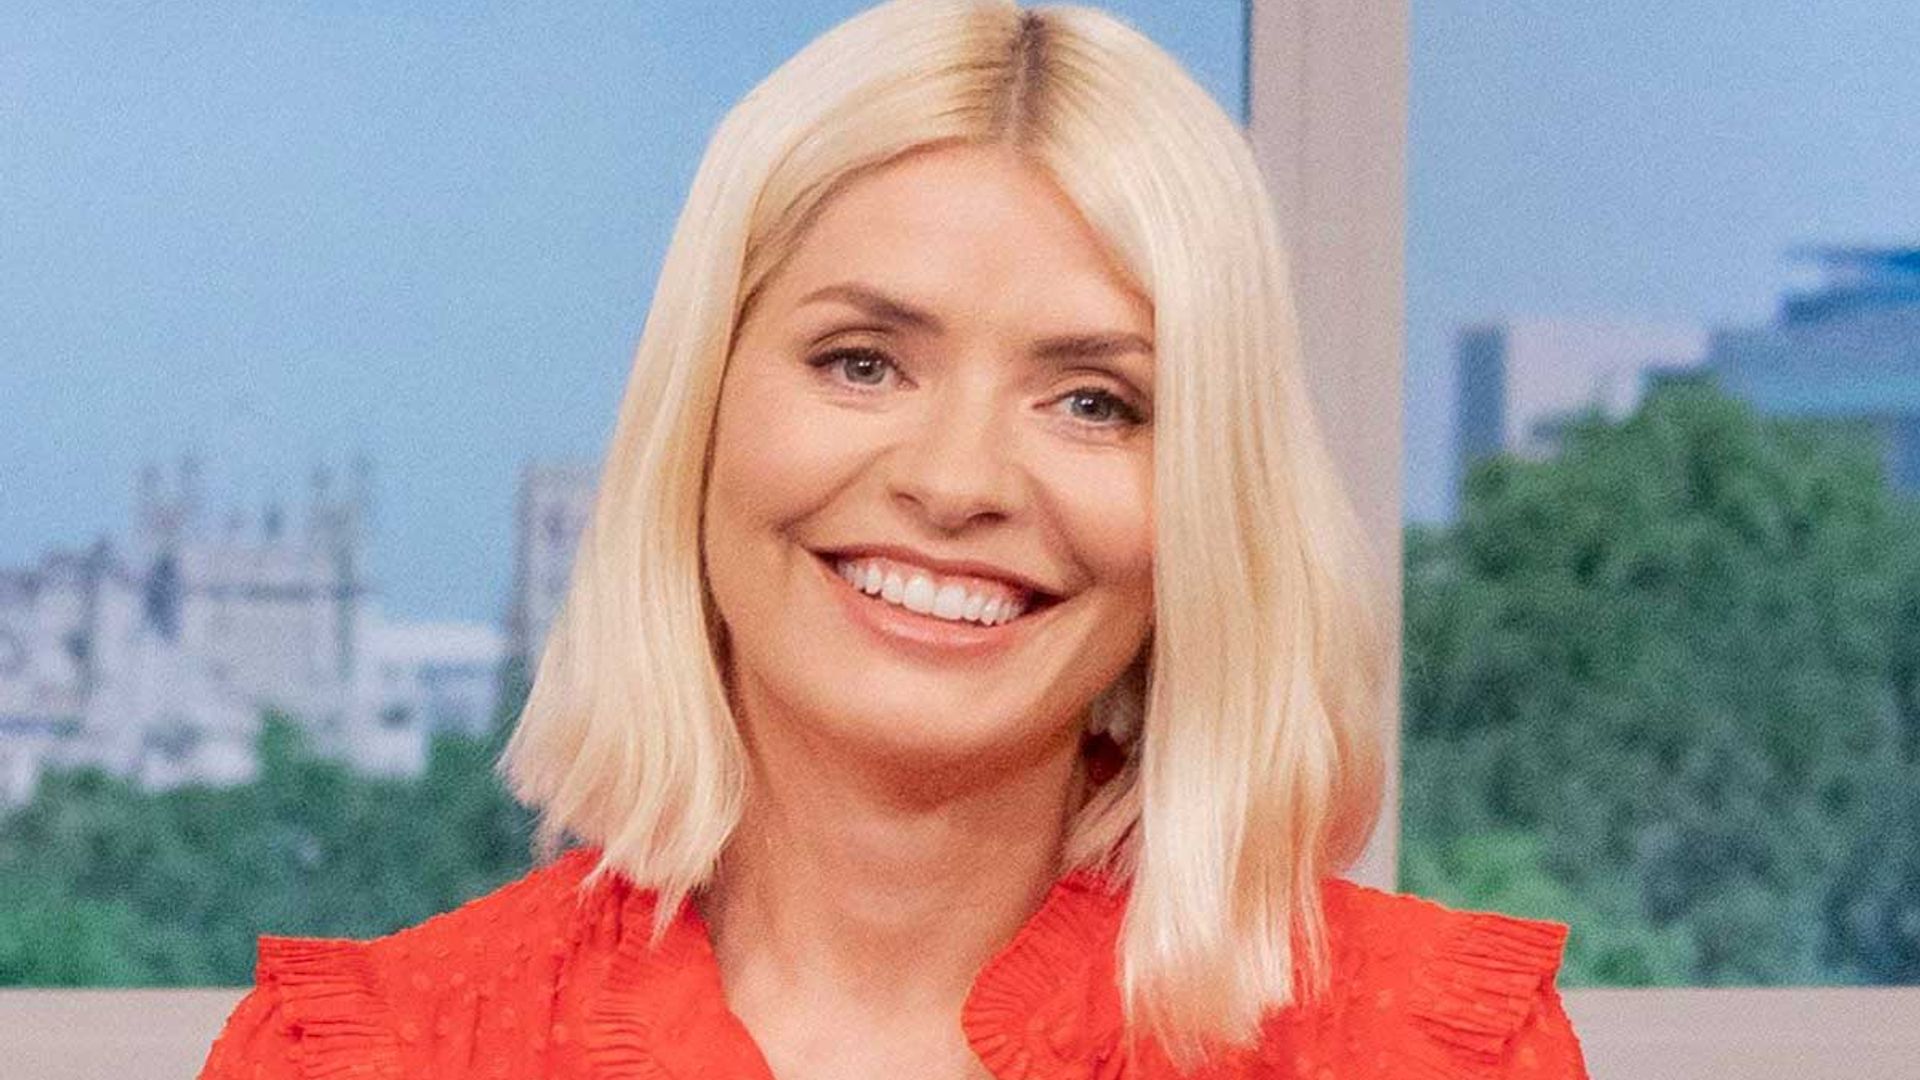 Holly Willoughby's fans can't get enough of her leopard print dress – and neither can we